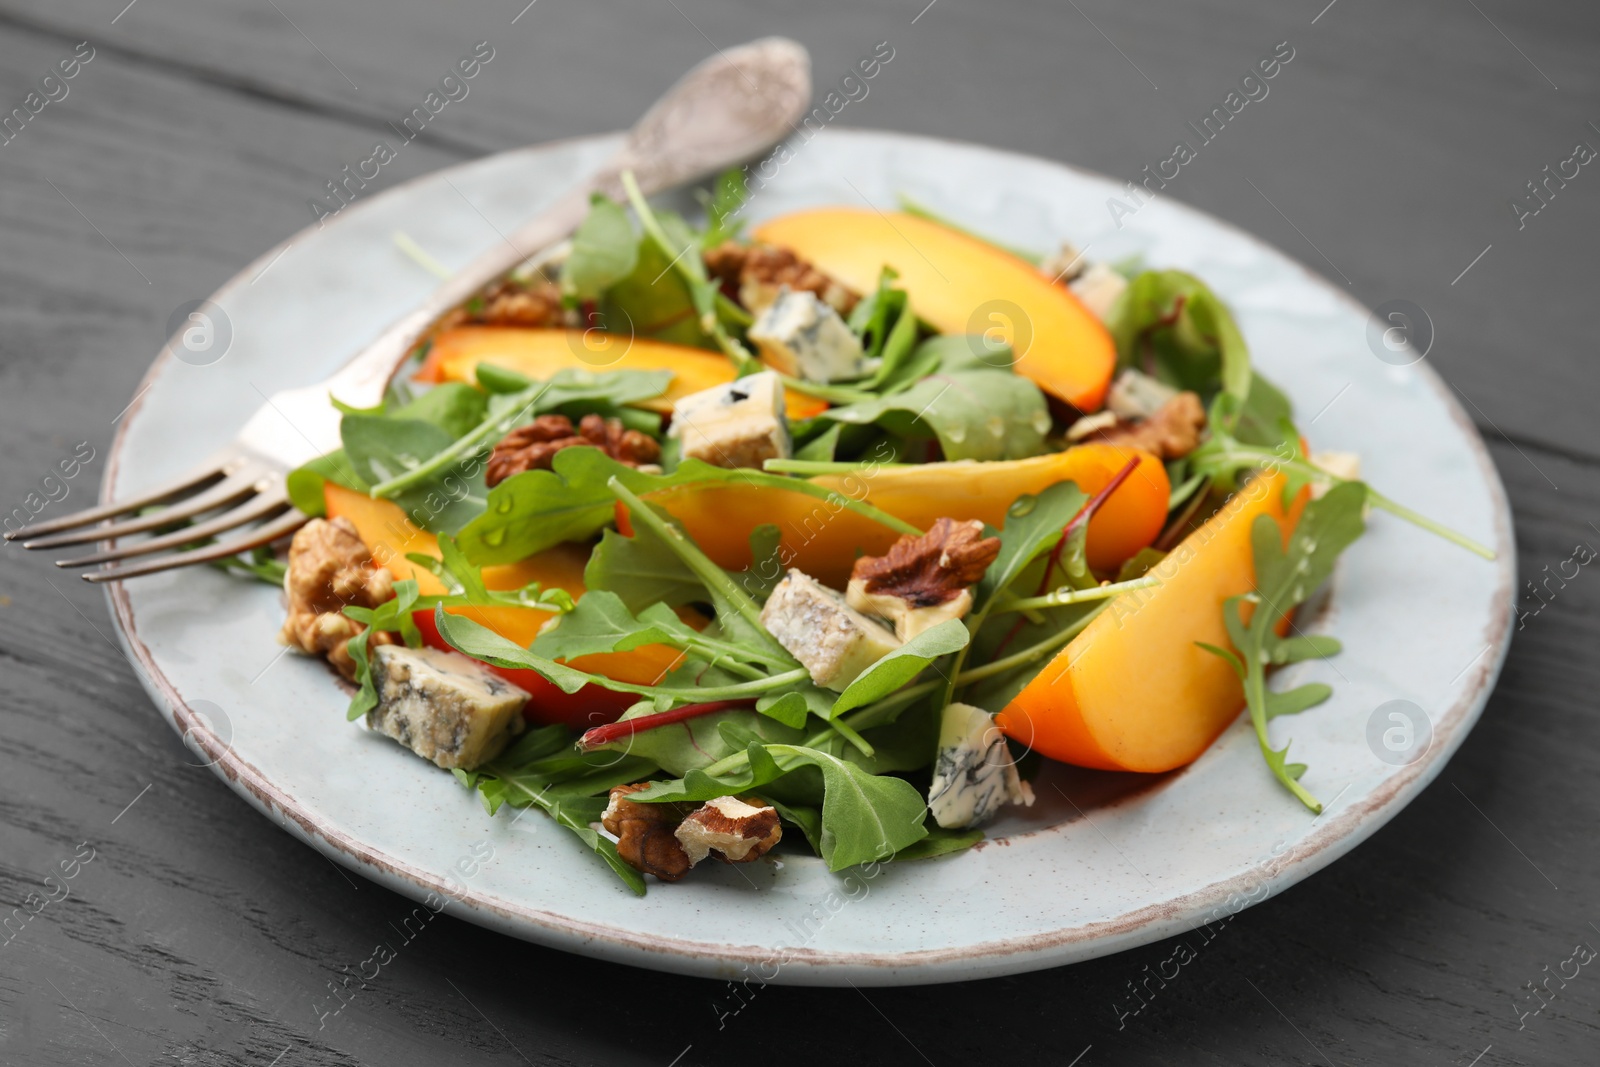 Photo of Tasty salad with persimmon, blue cheese and walnuts served on grey wooden table, closeup